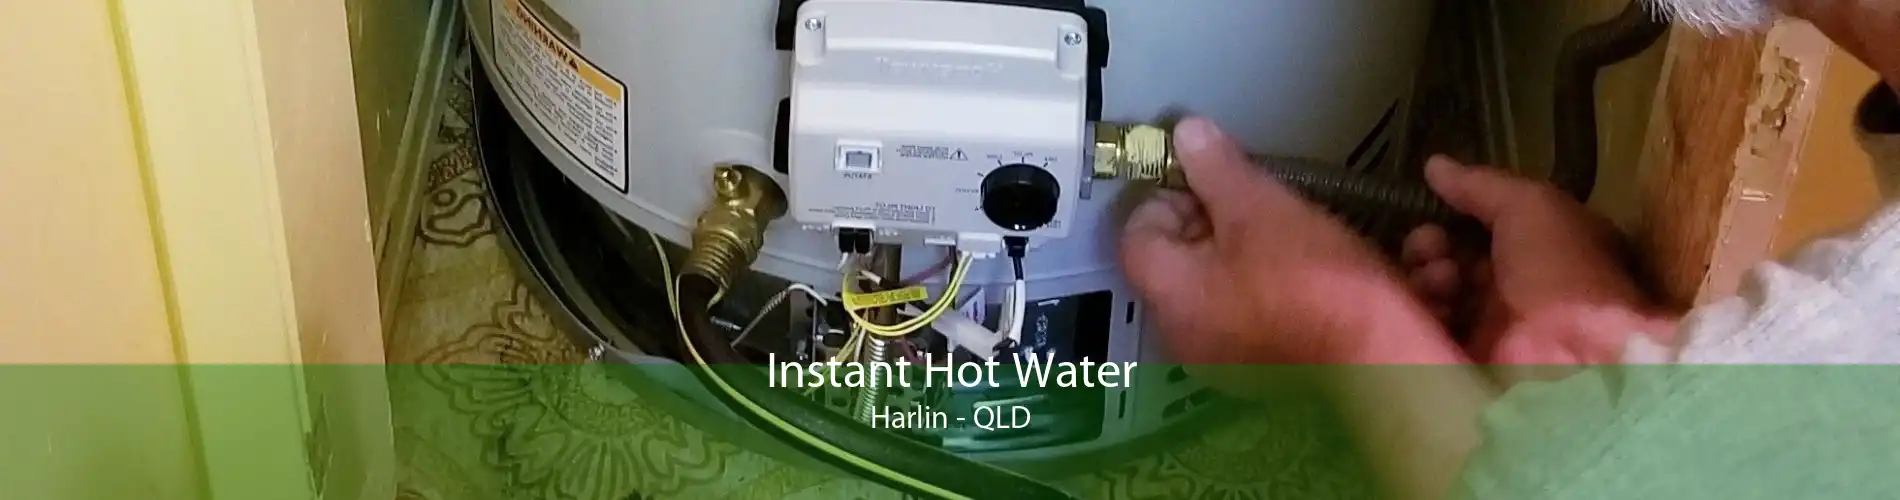 Instant Hot Water Harlin - QLD